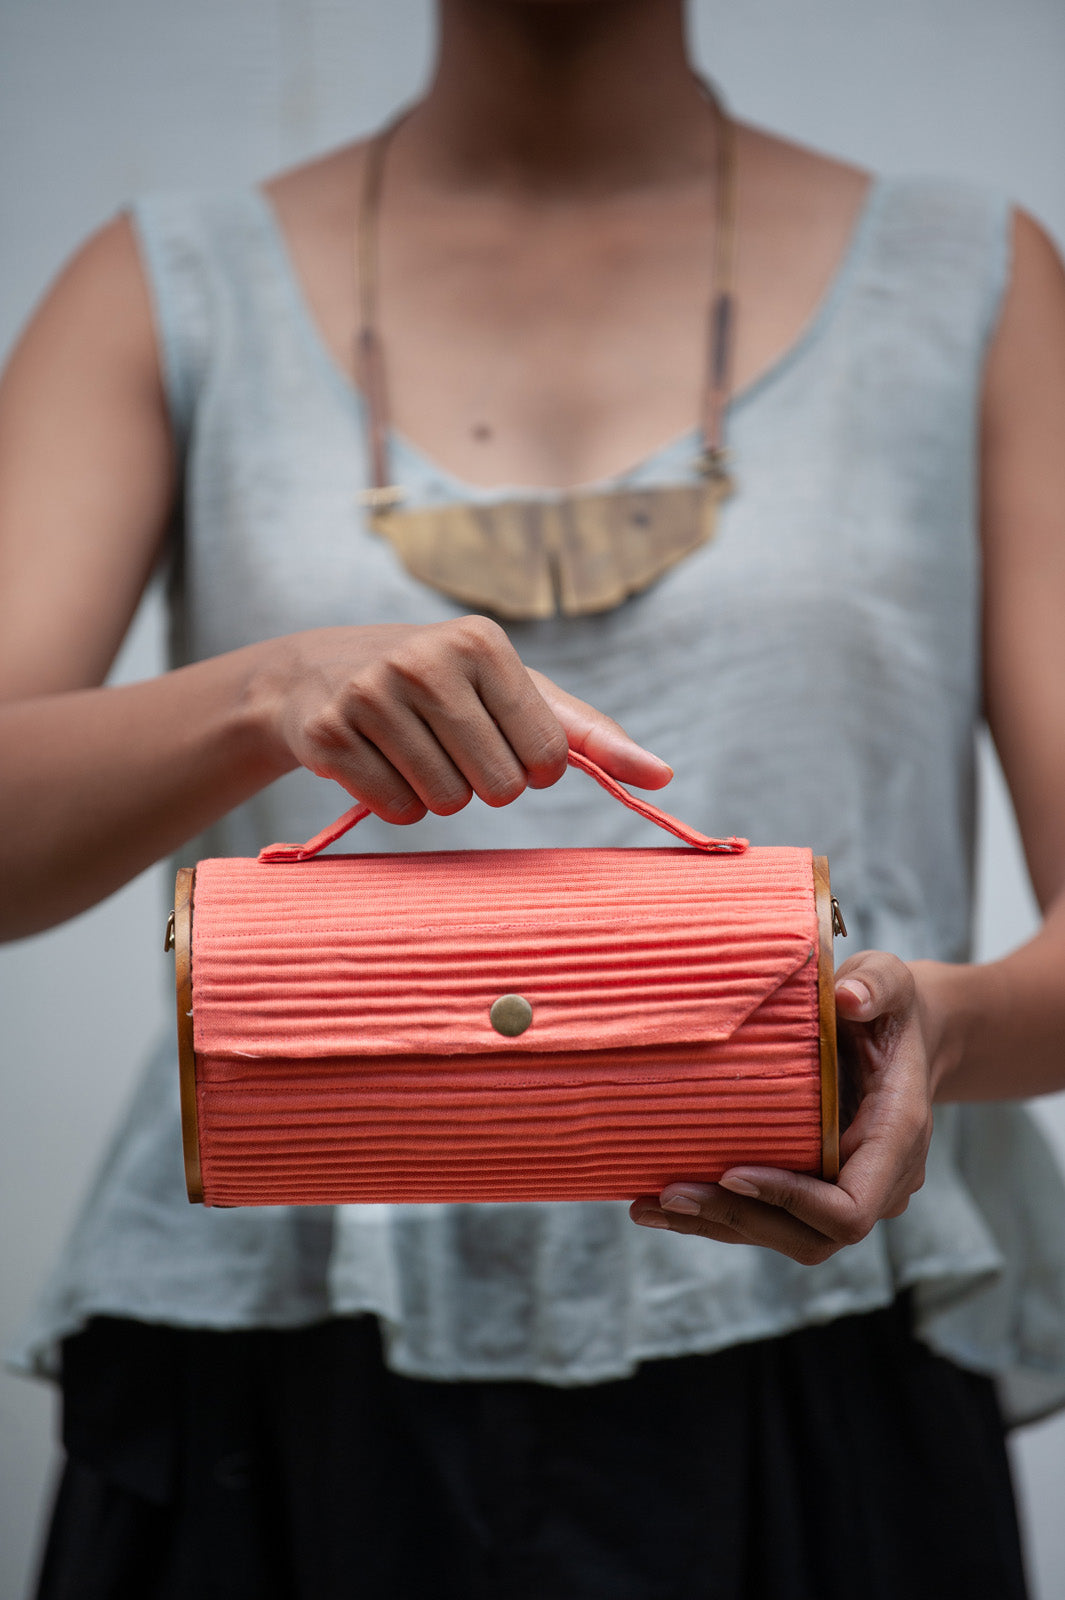 100% handcrafted round clutch comes with 1 detachable sleeve - in a solid coral hue.